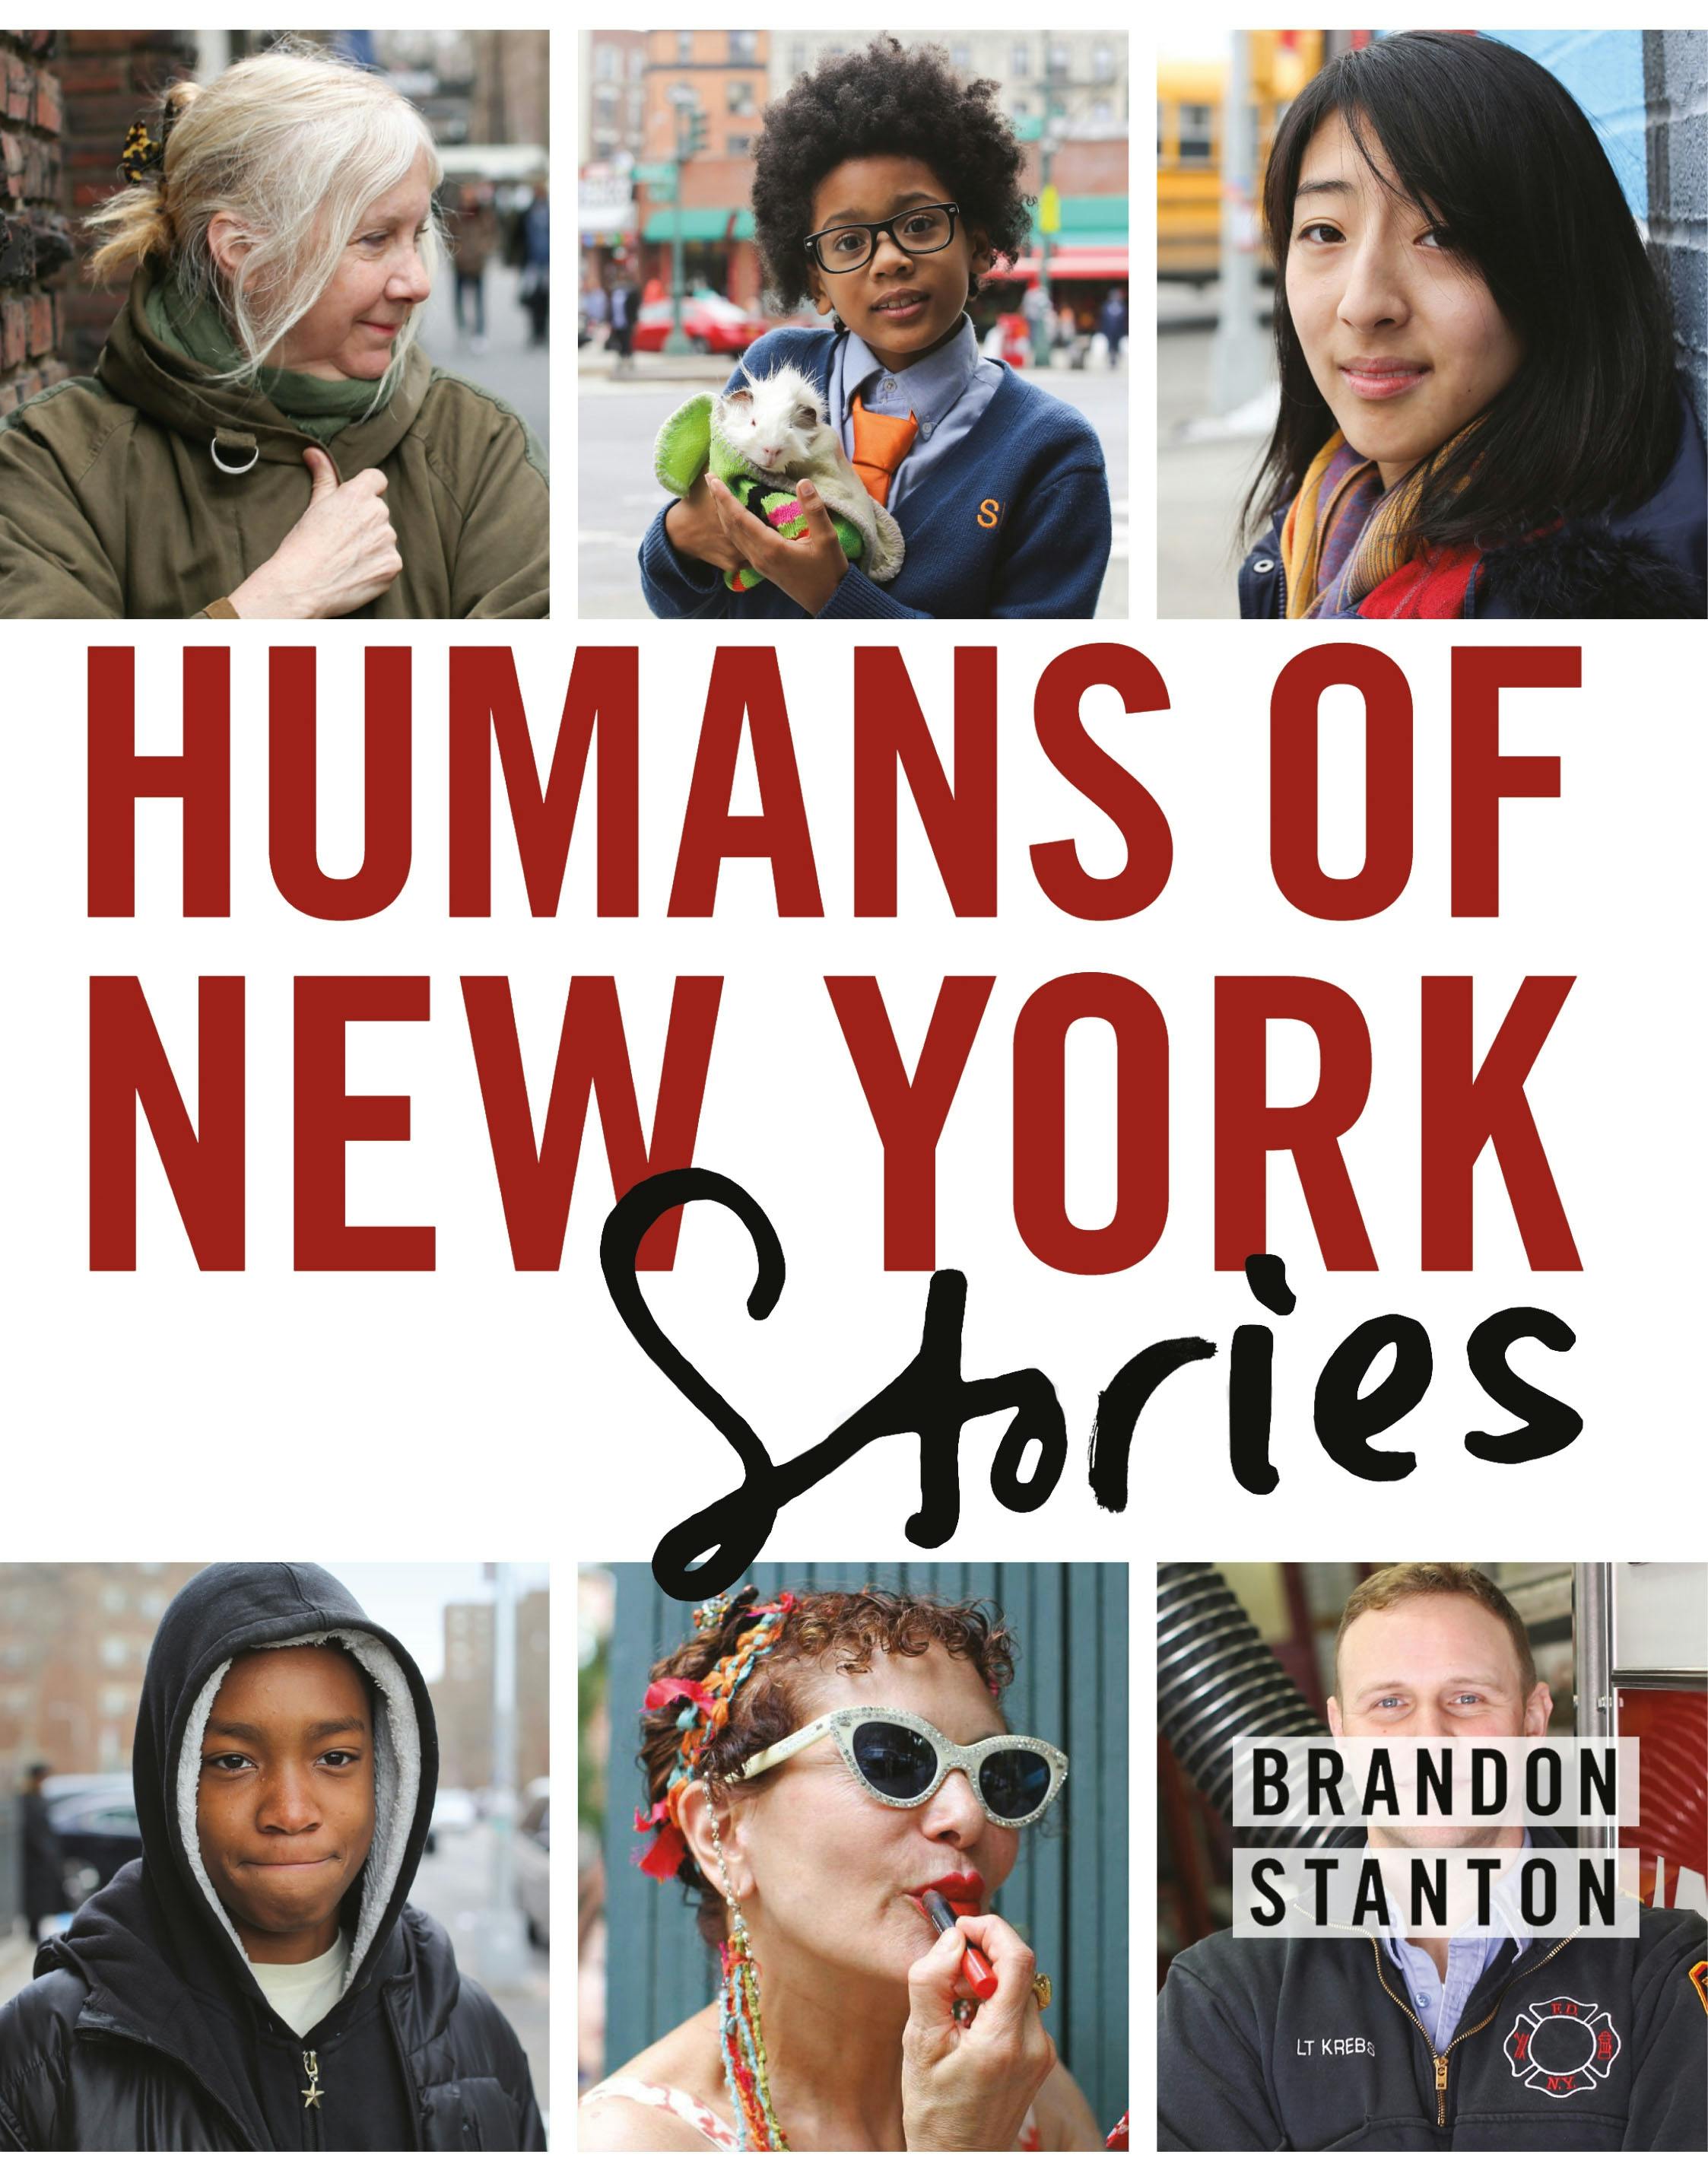 humans of new york vs humans of new york stories